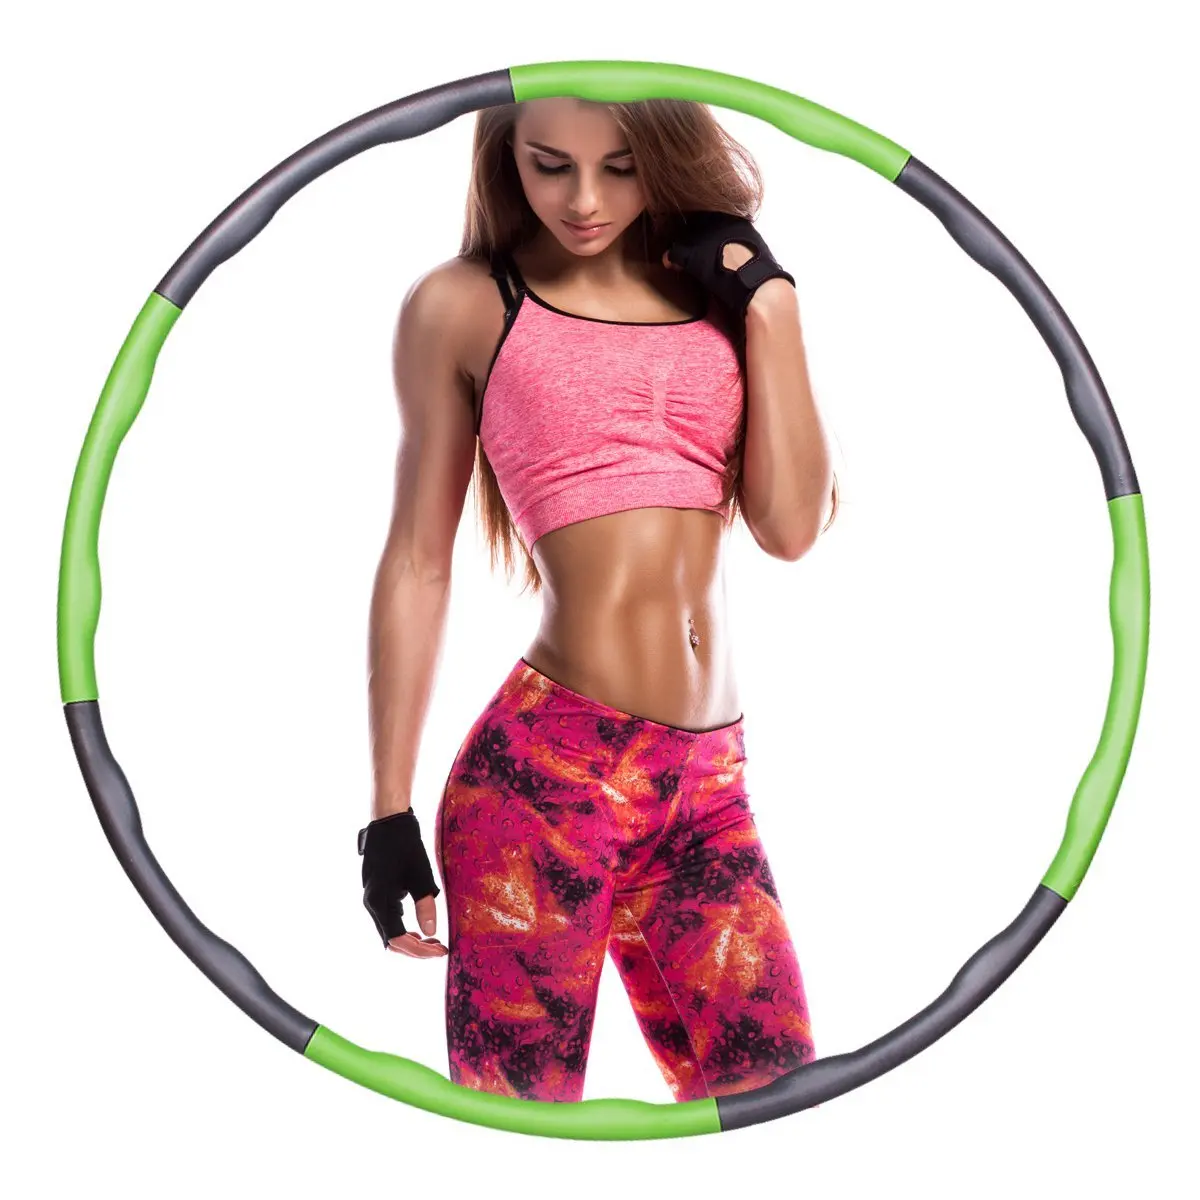 how to use a hula hoop for exercise